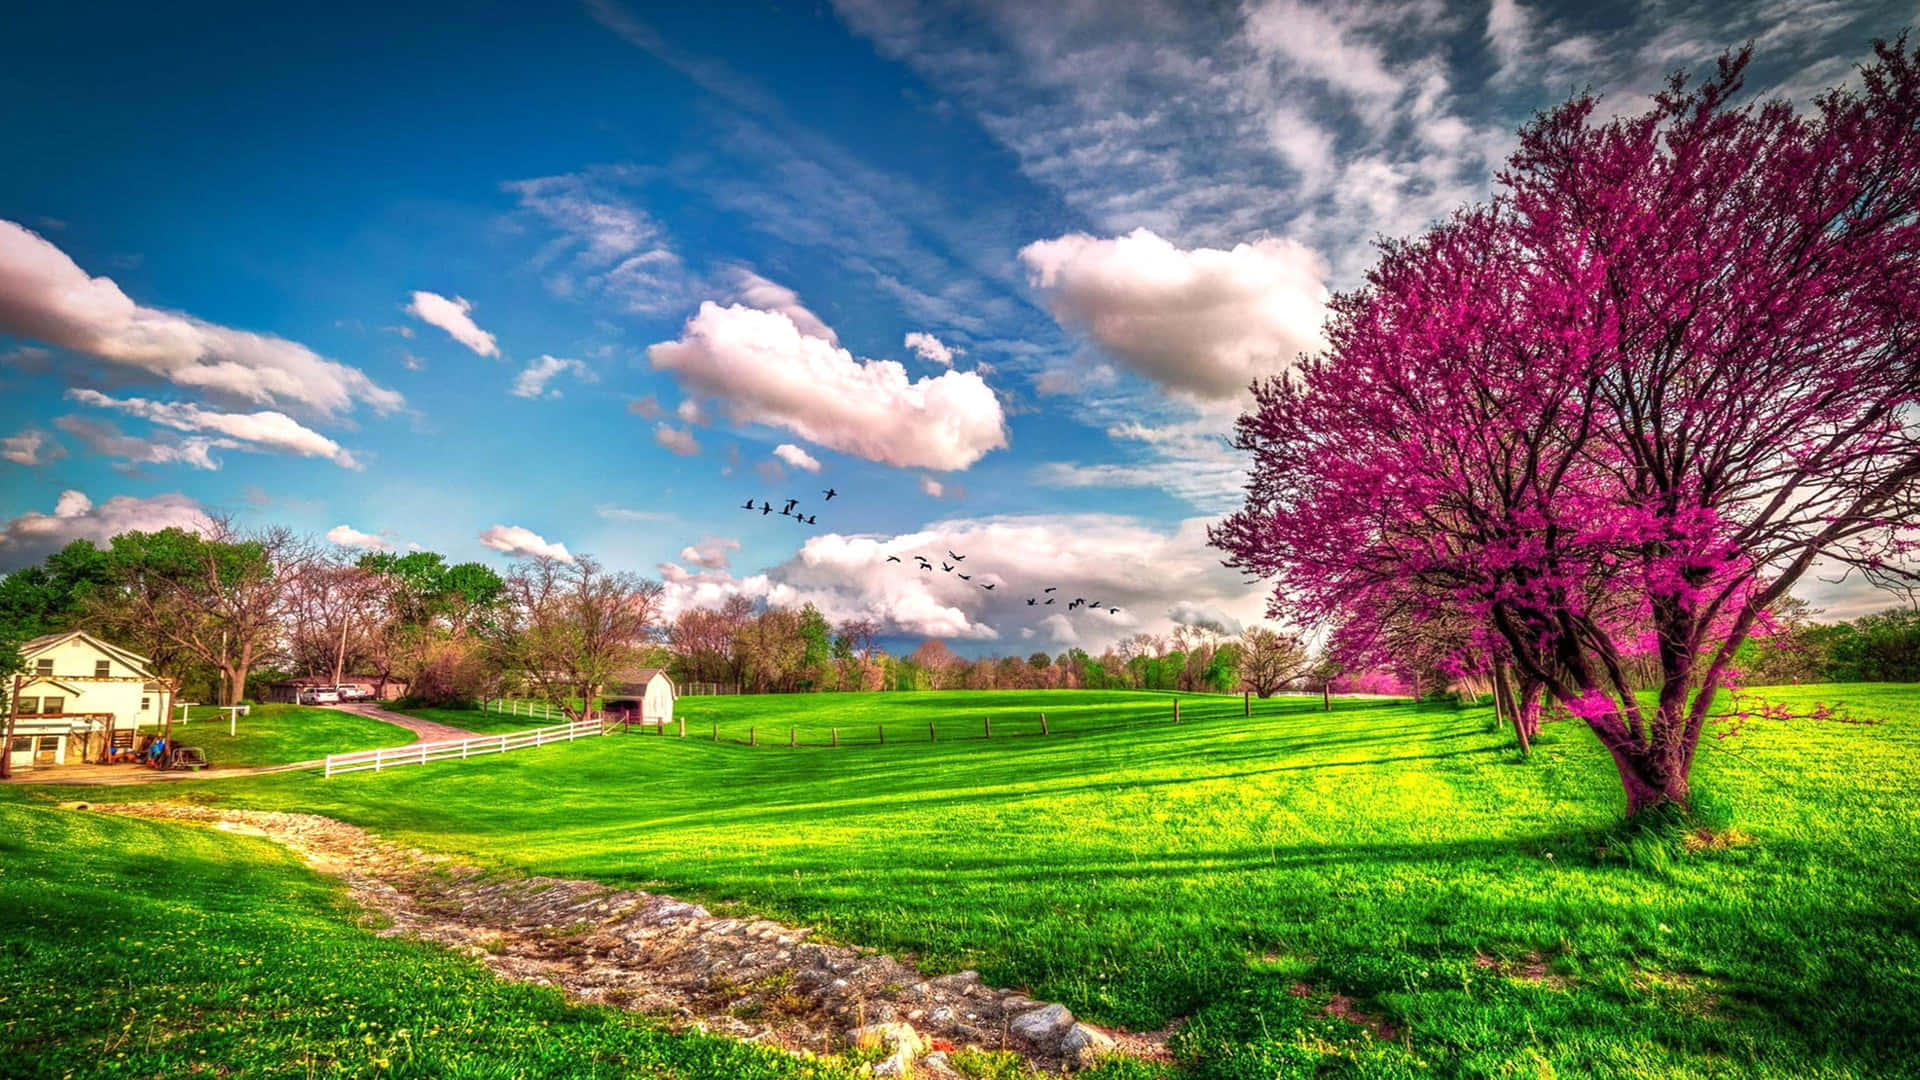 Spring season wallpaper Resolution 1920x1080 | Best Download this awesome wallpaper - Cool Wallpaper HD - CoolWallpaper-HD.com